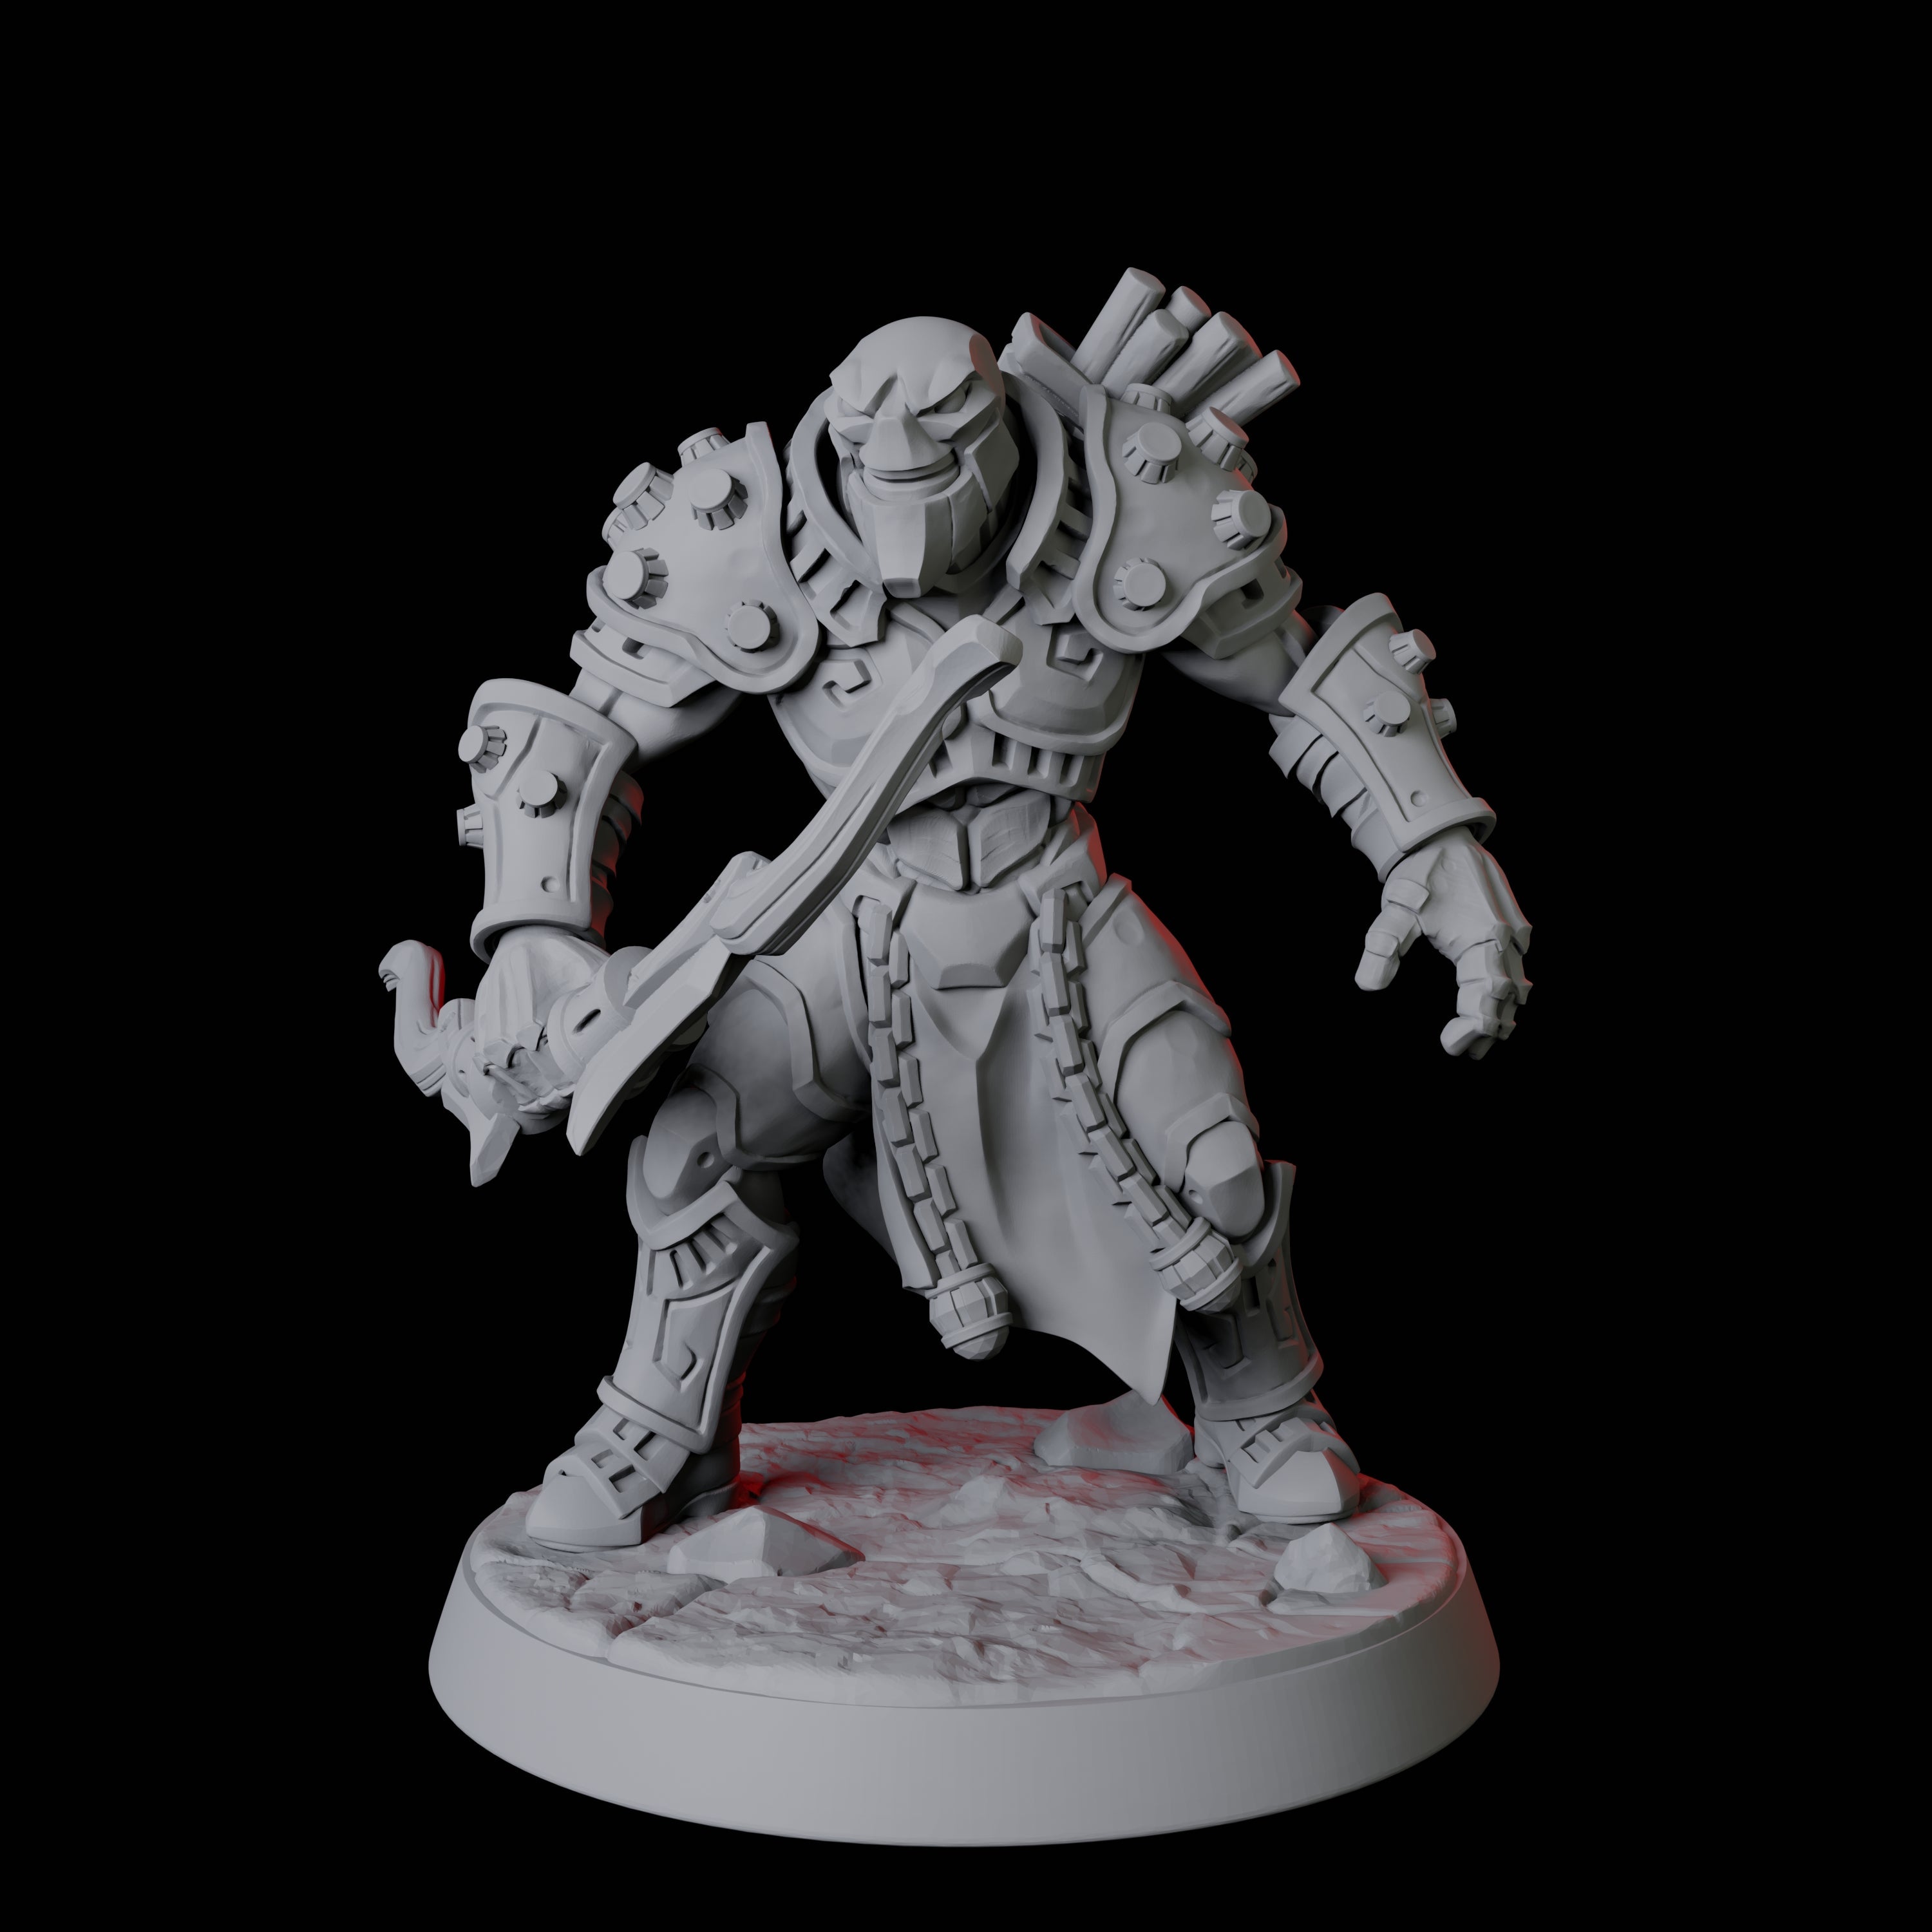 Battle-Ready Warforged C Miniature for Dungeons and Dragons, Pathfinder or other TTRPGs